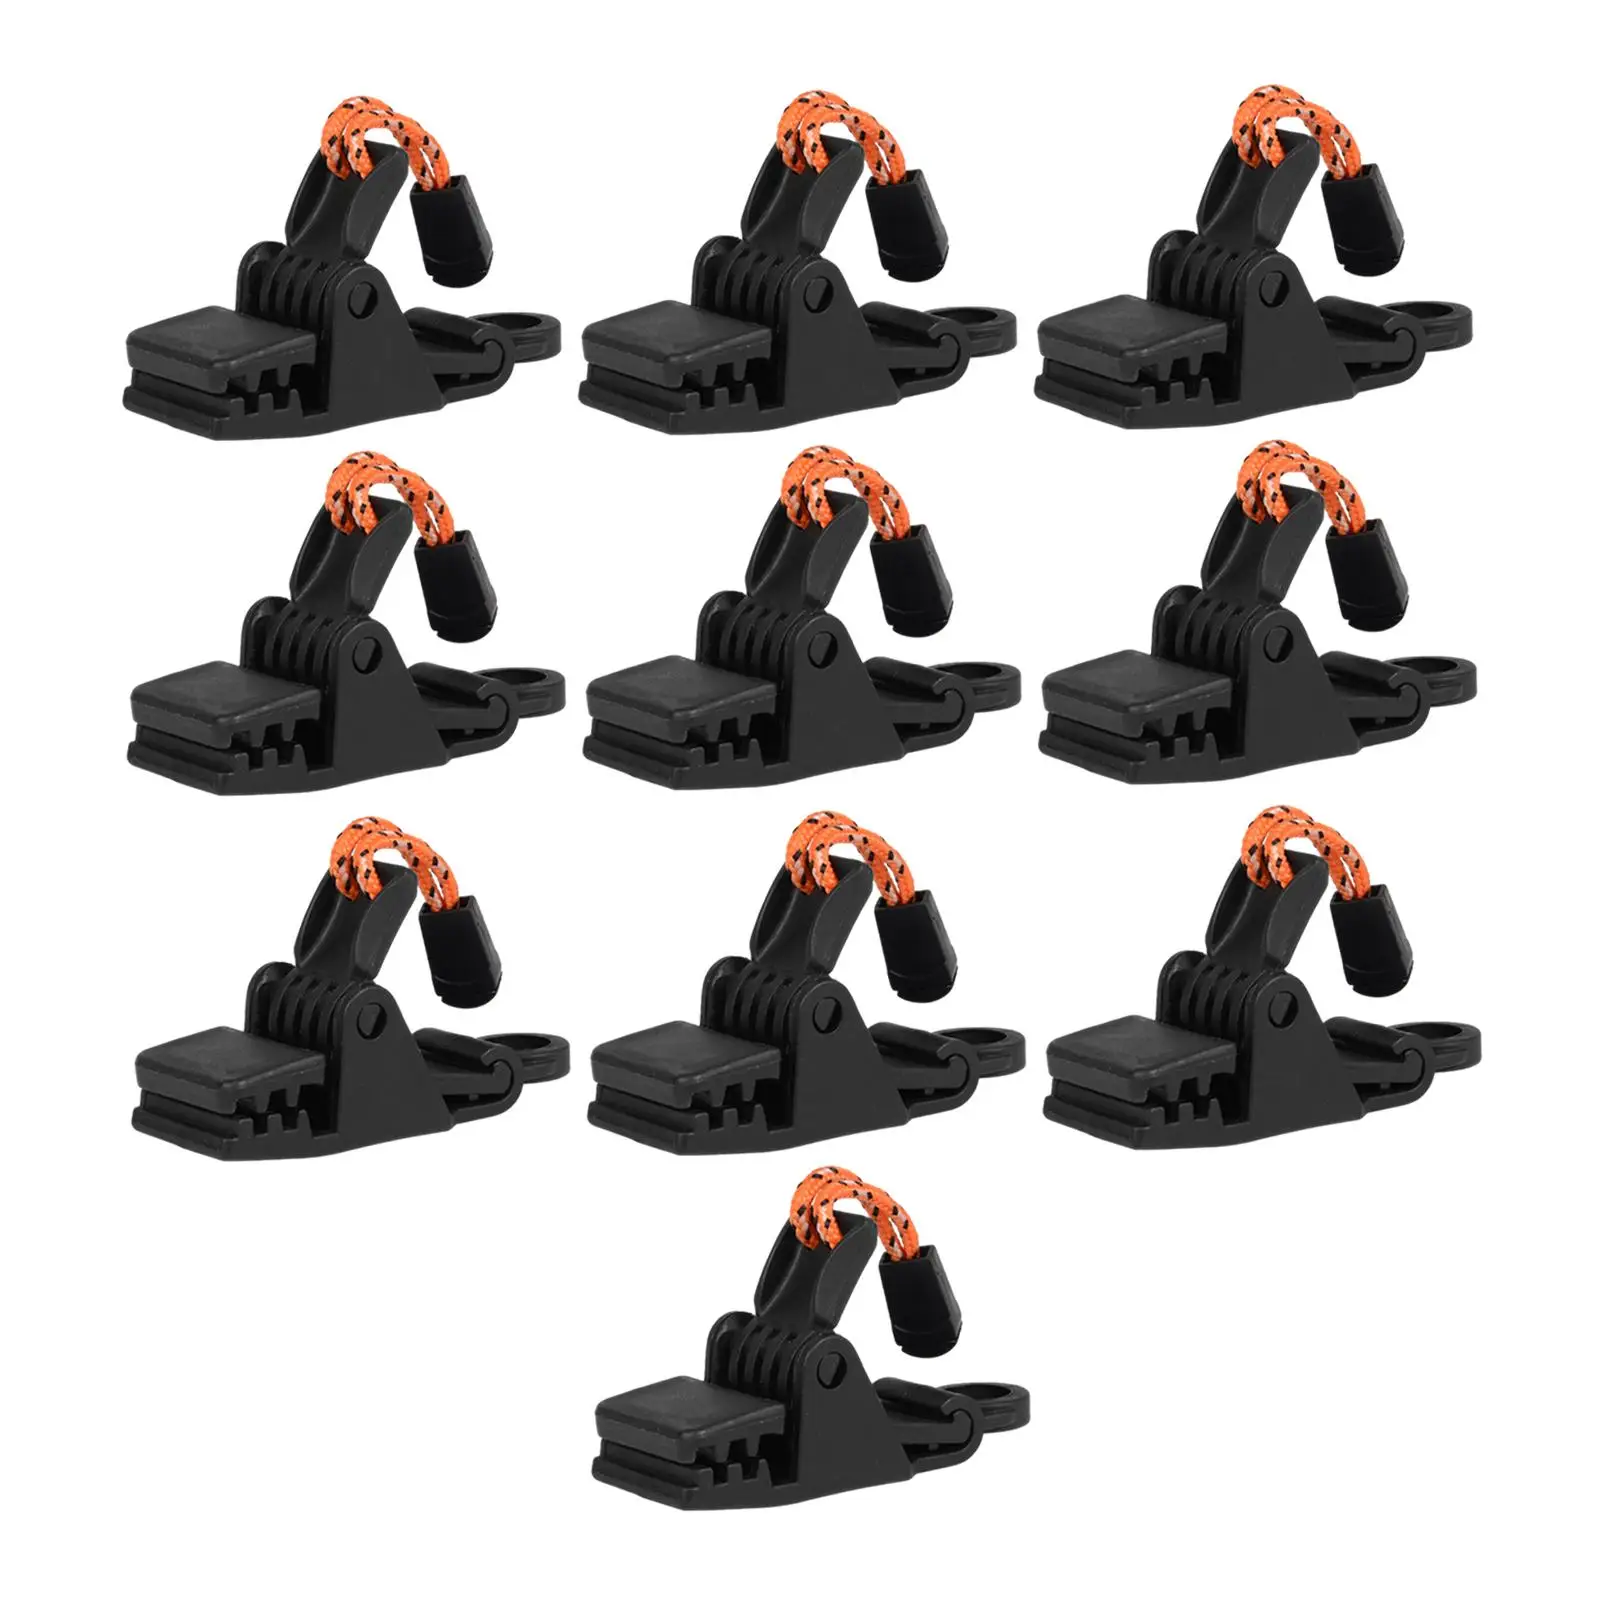 10x Tarp Clips Adjustable Reusable Lightweight Tent Clips Clamp Grip Clamps for Tarps Shade Cloth Fishing Awnings Hiking